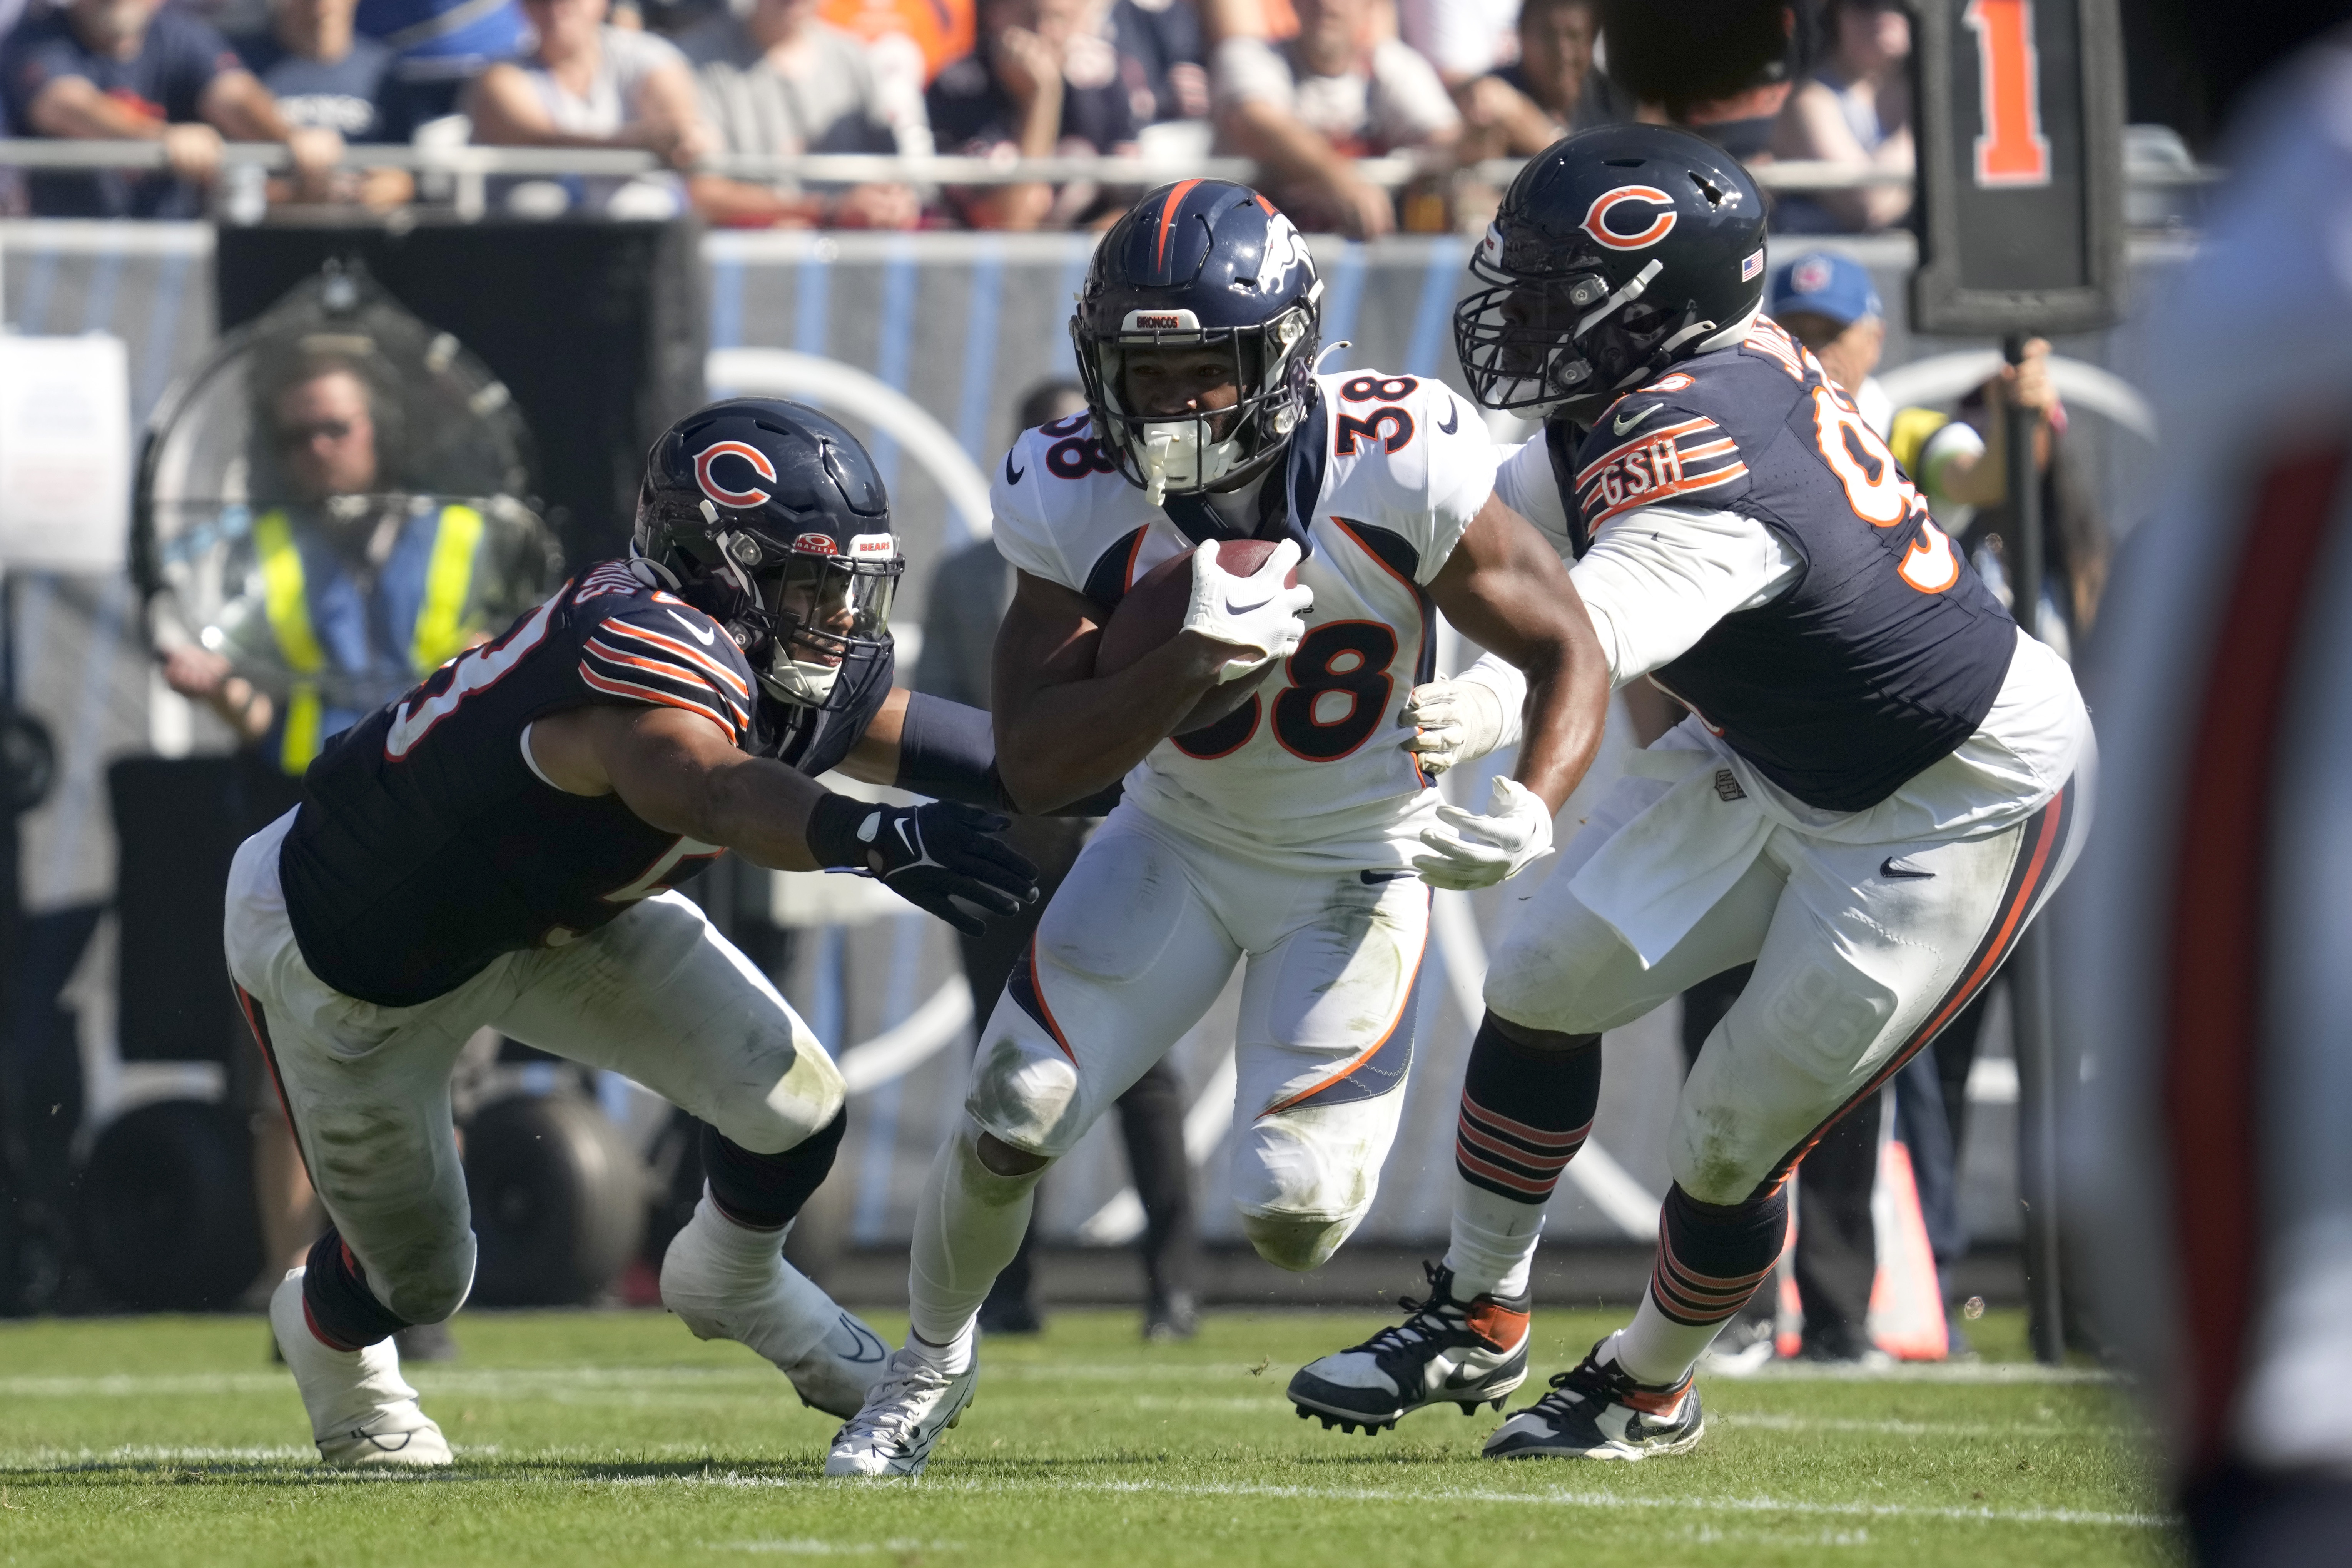 Broncos rally from 21 down to top Bears 31-28